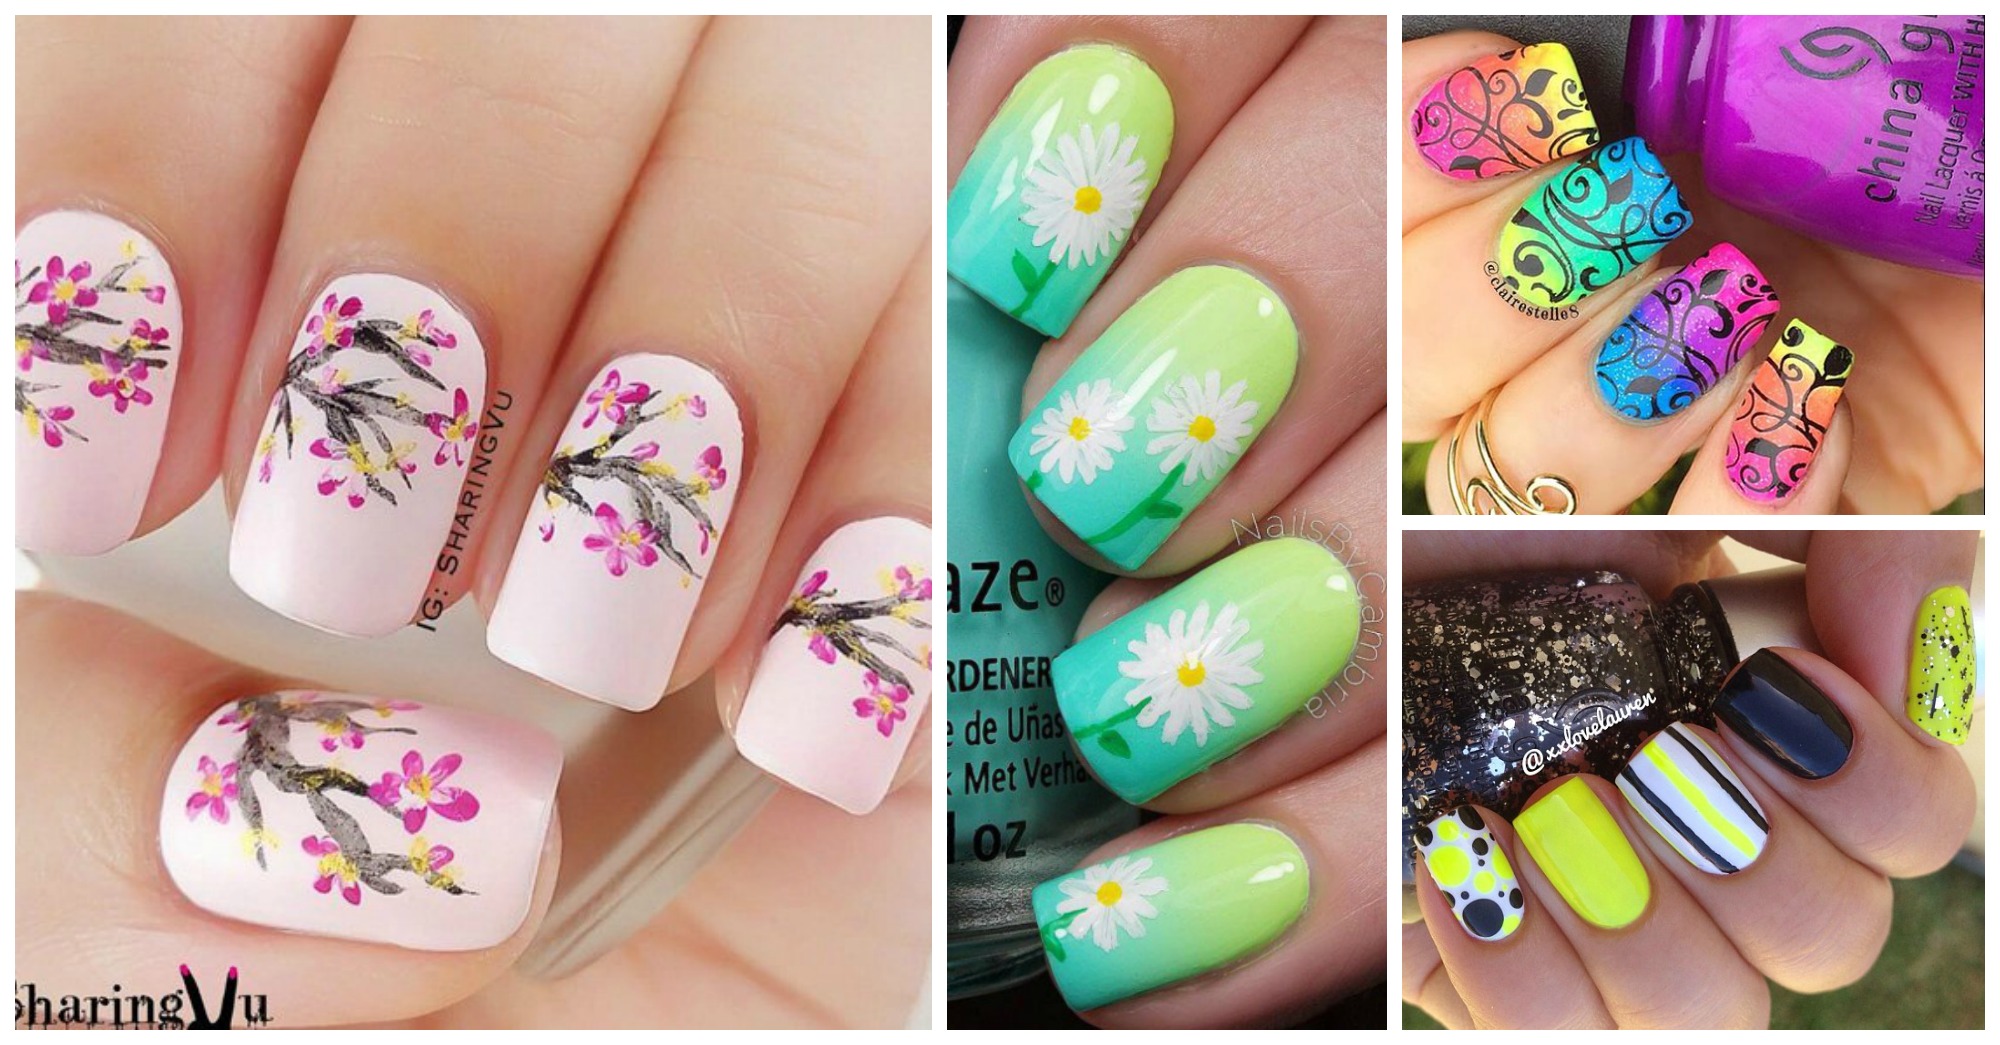 15 Lovely Nail Designs You Should Copy Right Now